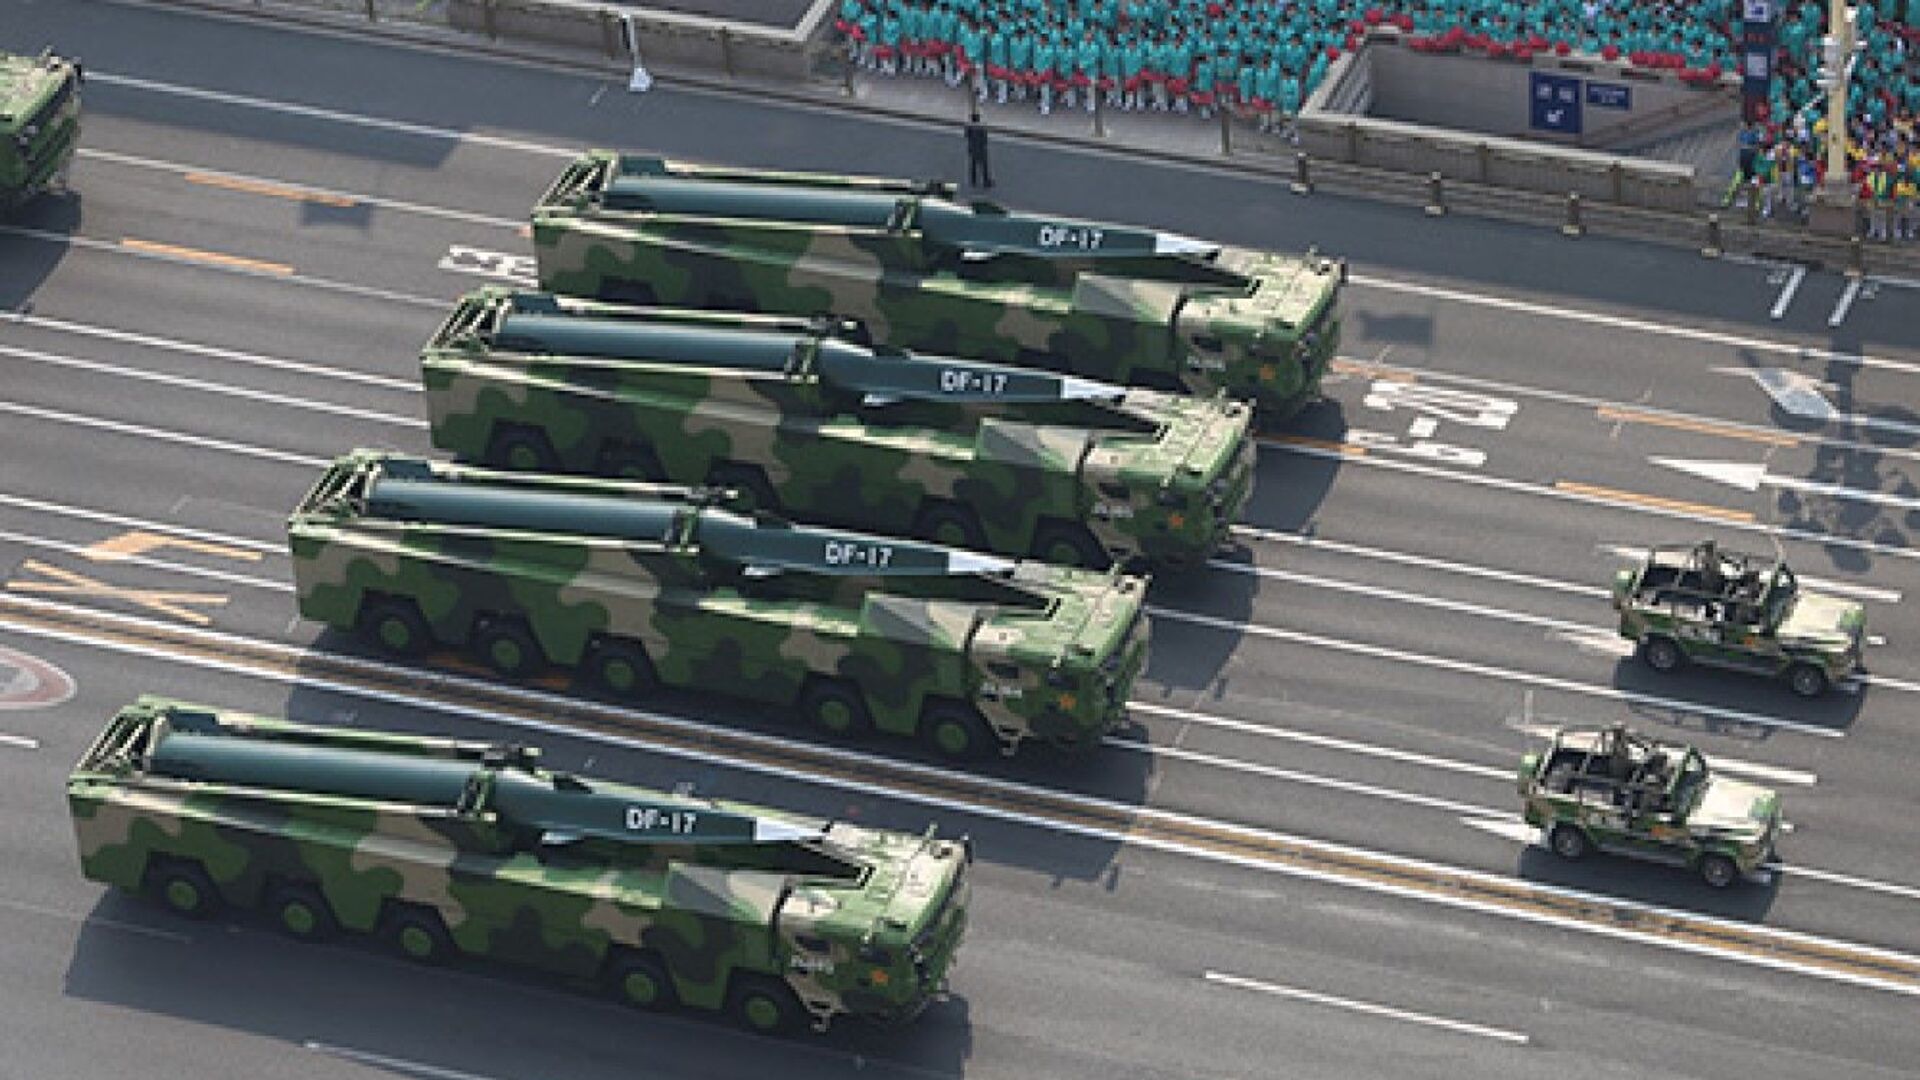 Making their debut in the general public for the first time, DF-17 hypersonic missiles join China's National Day parade held in Beijing on October 1, 2019 - Sputnik International, 1920, 02.12.2021